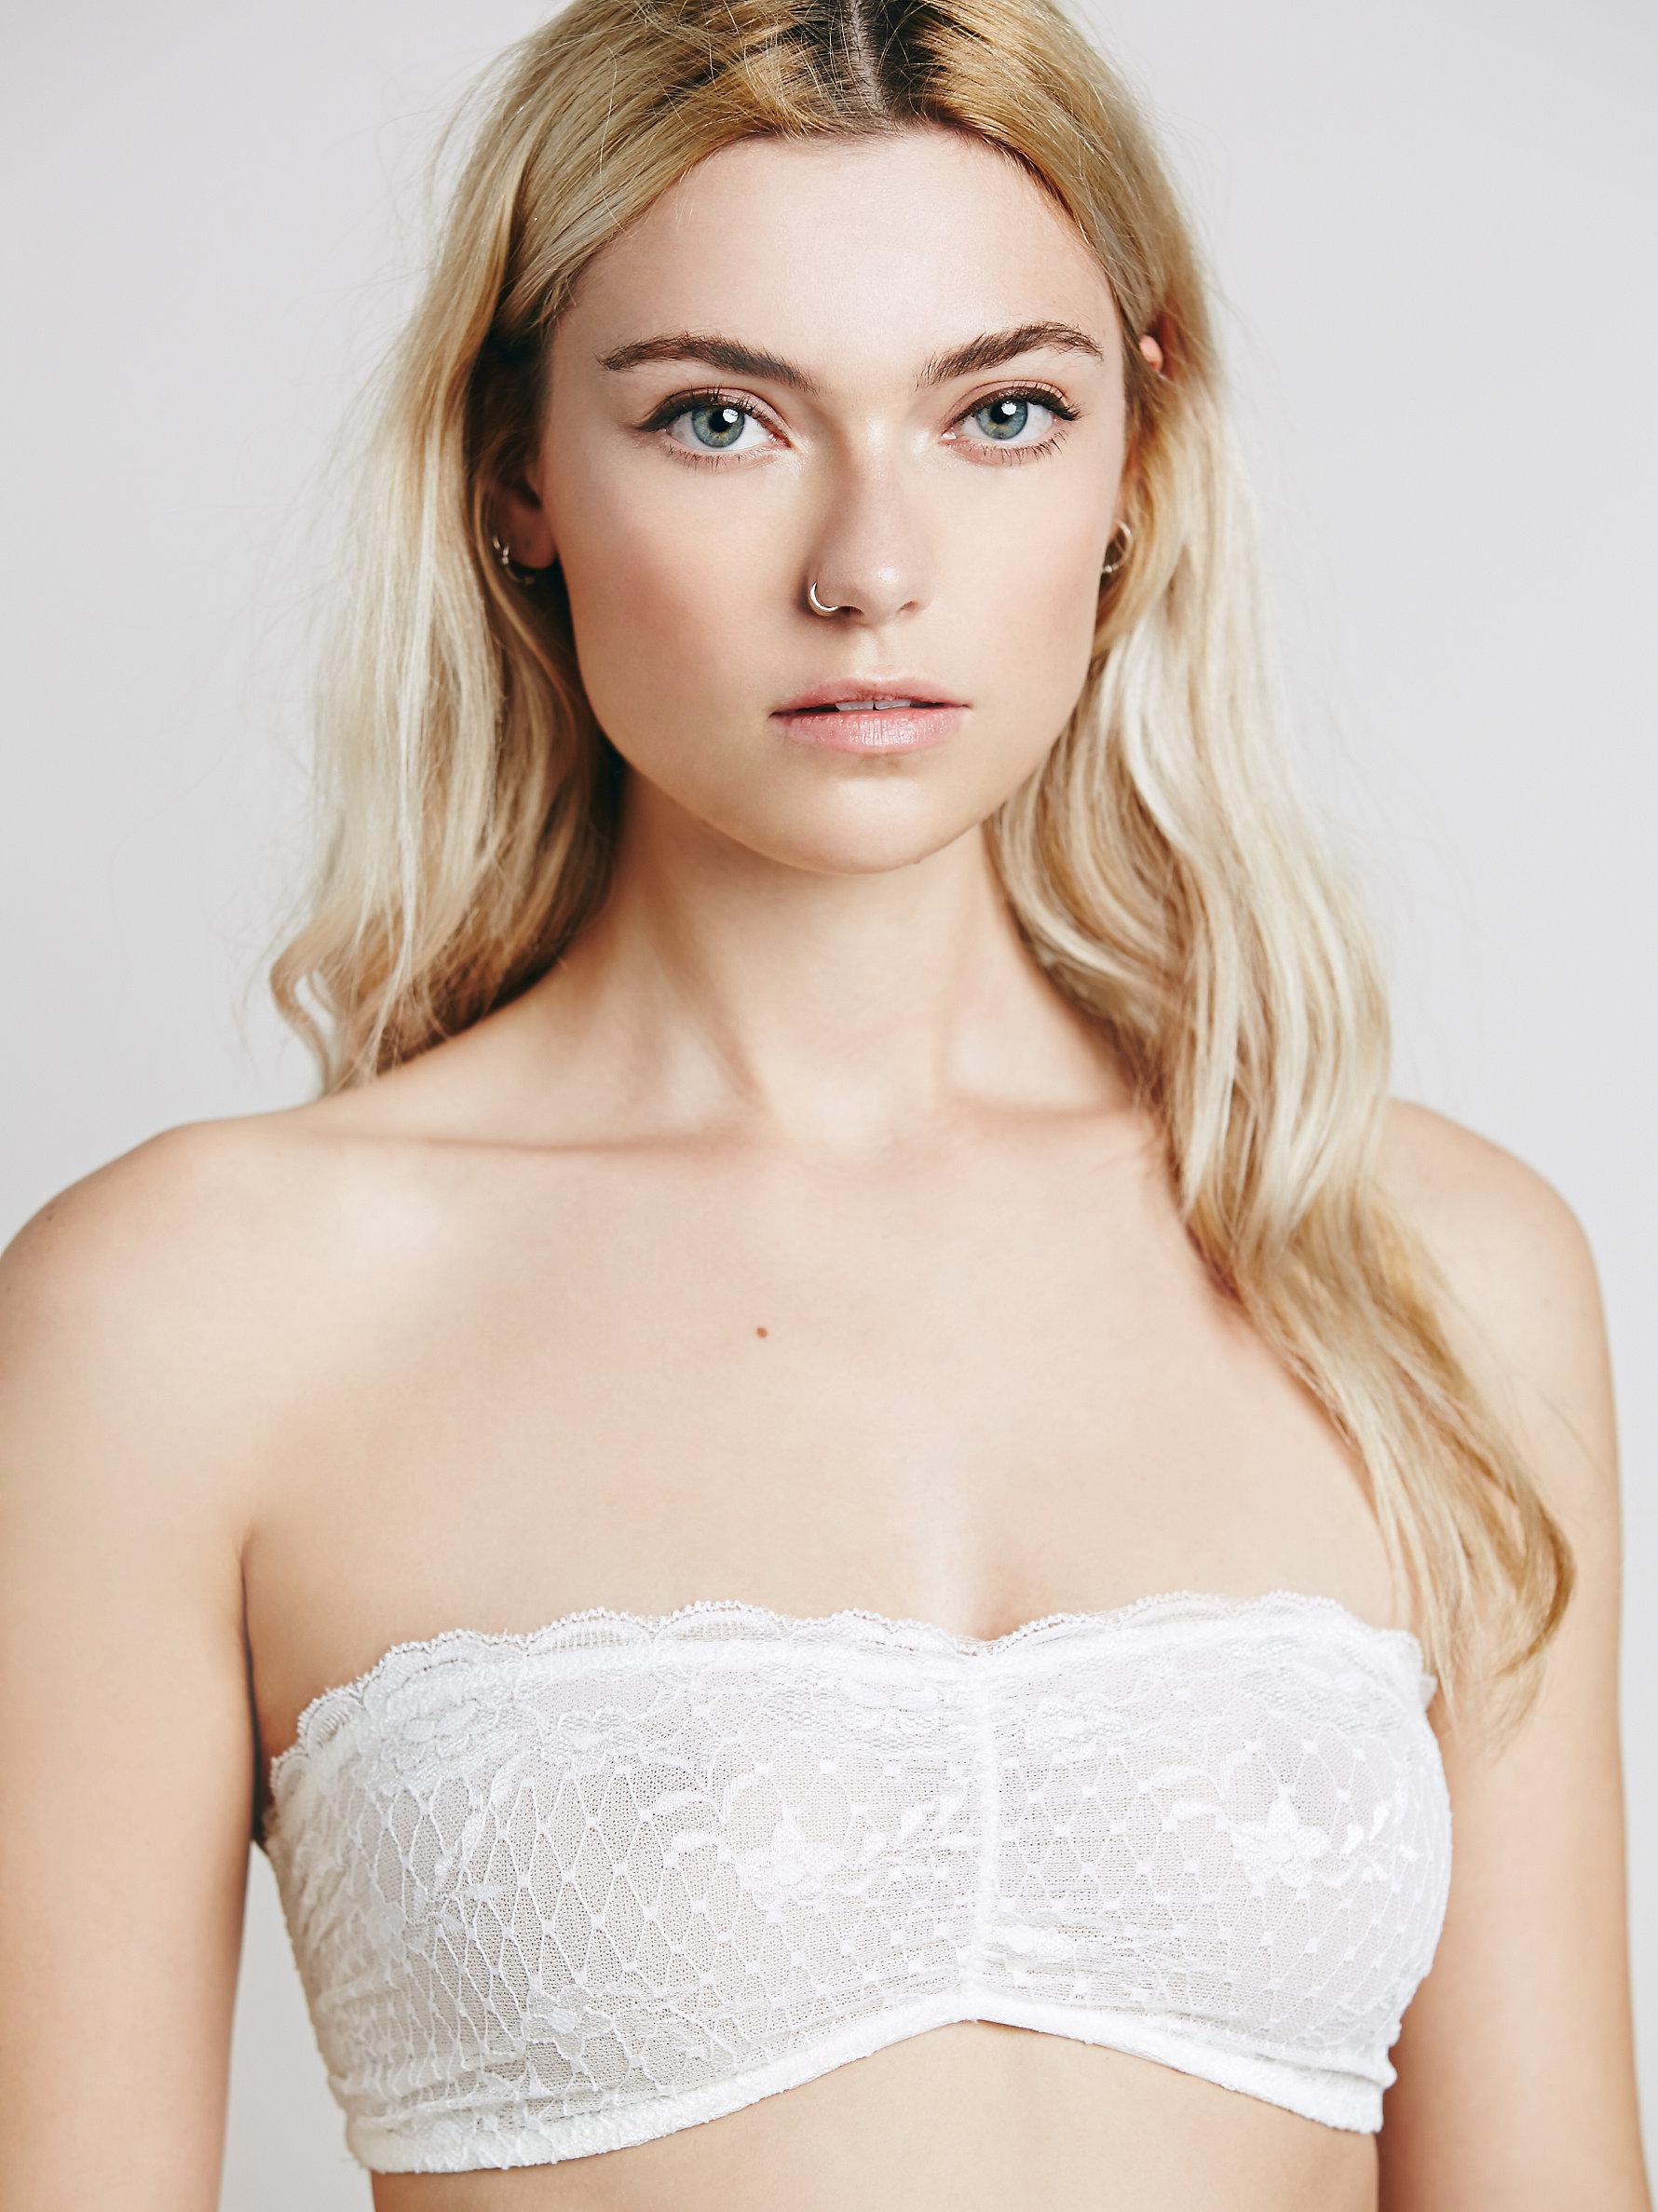 Free People Essential Lace Bandeau in White